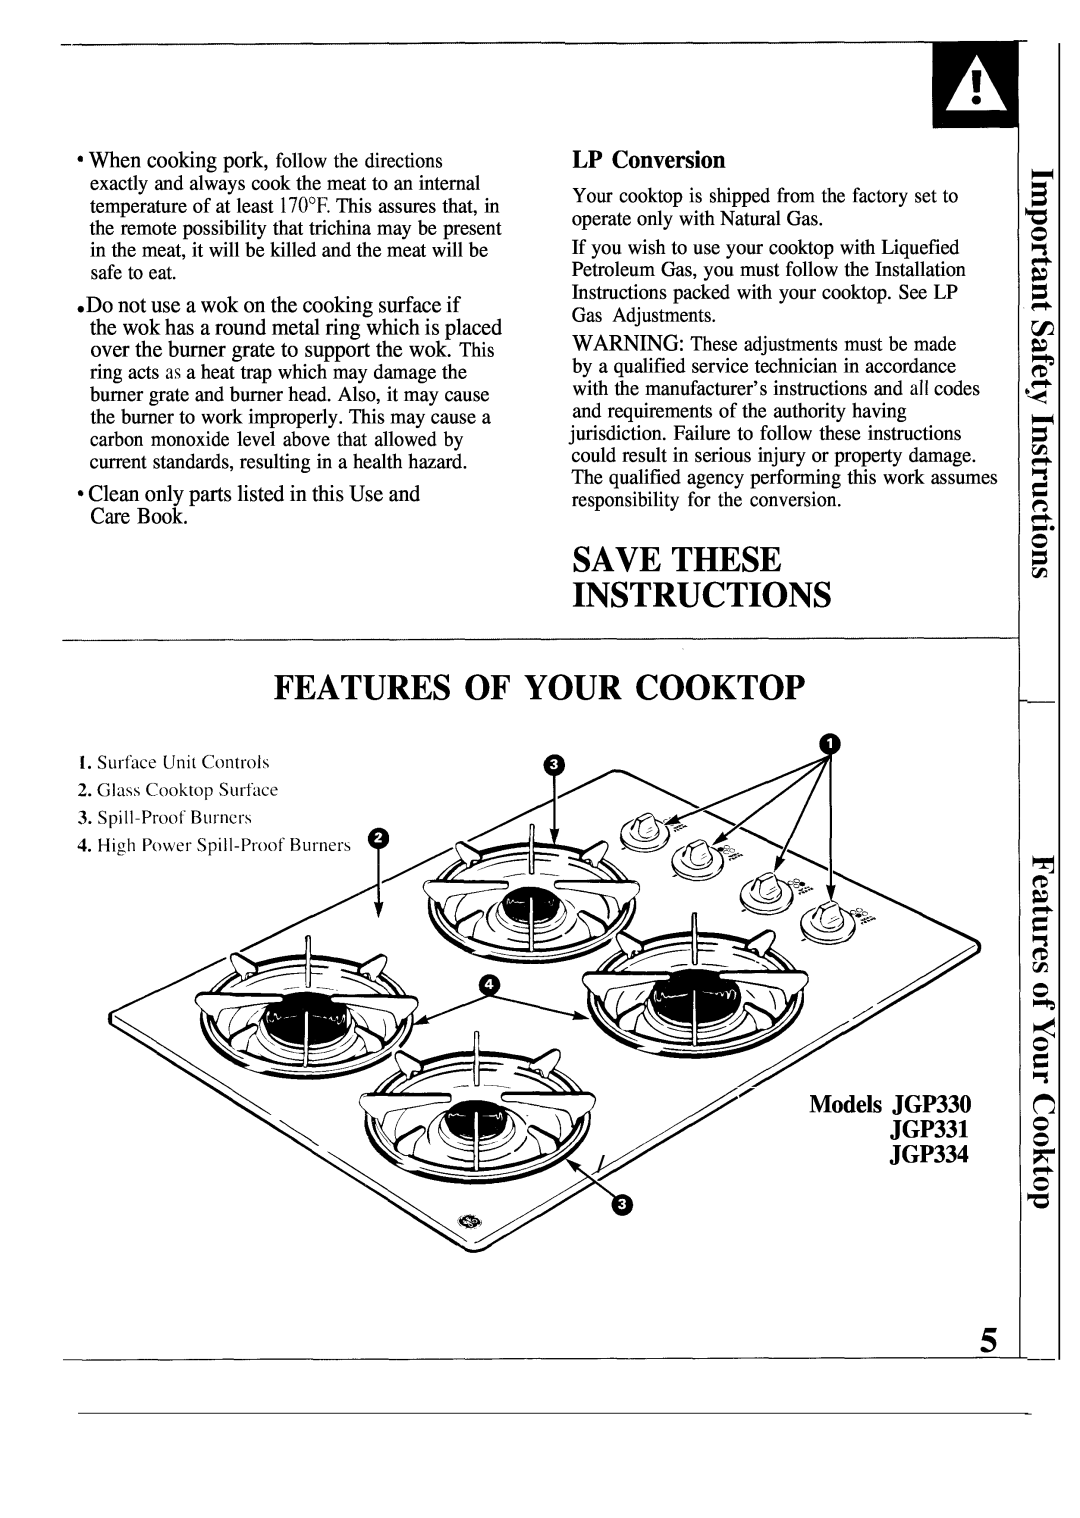 GE JGP334 warranty Save These Instructions, Features Of Your Cooktop, LP Conversion, JGP331, Models JGP330 